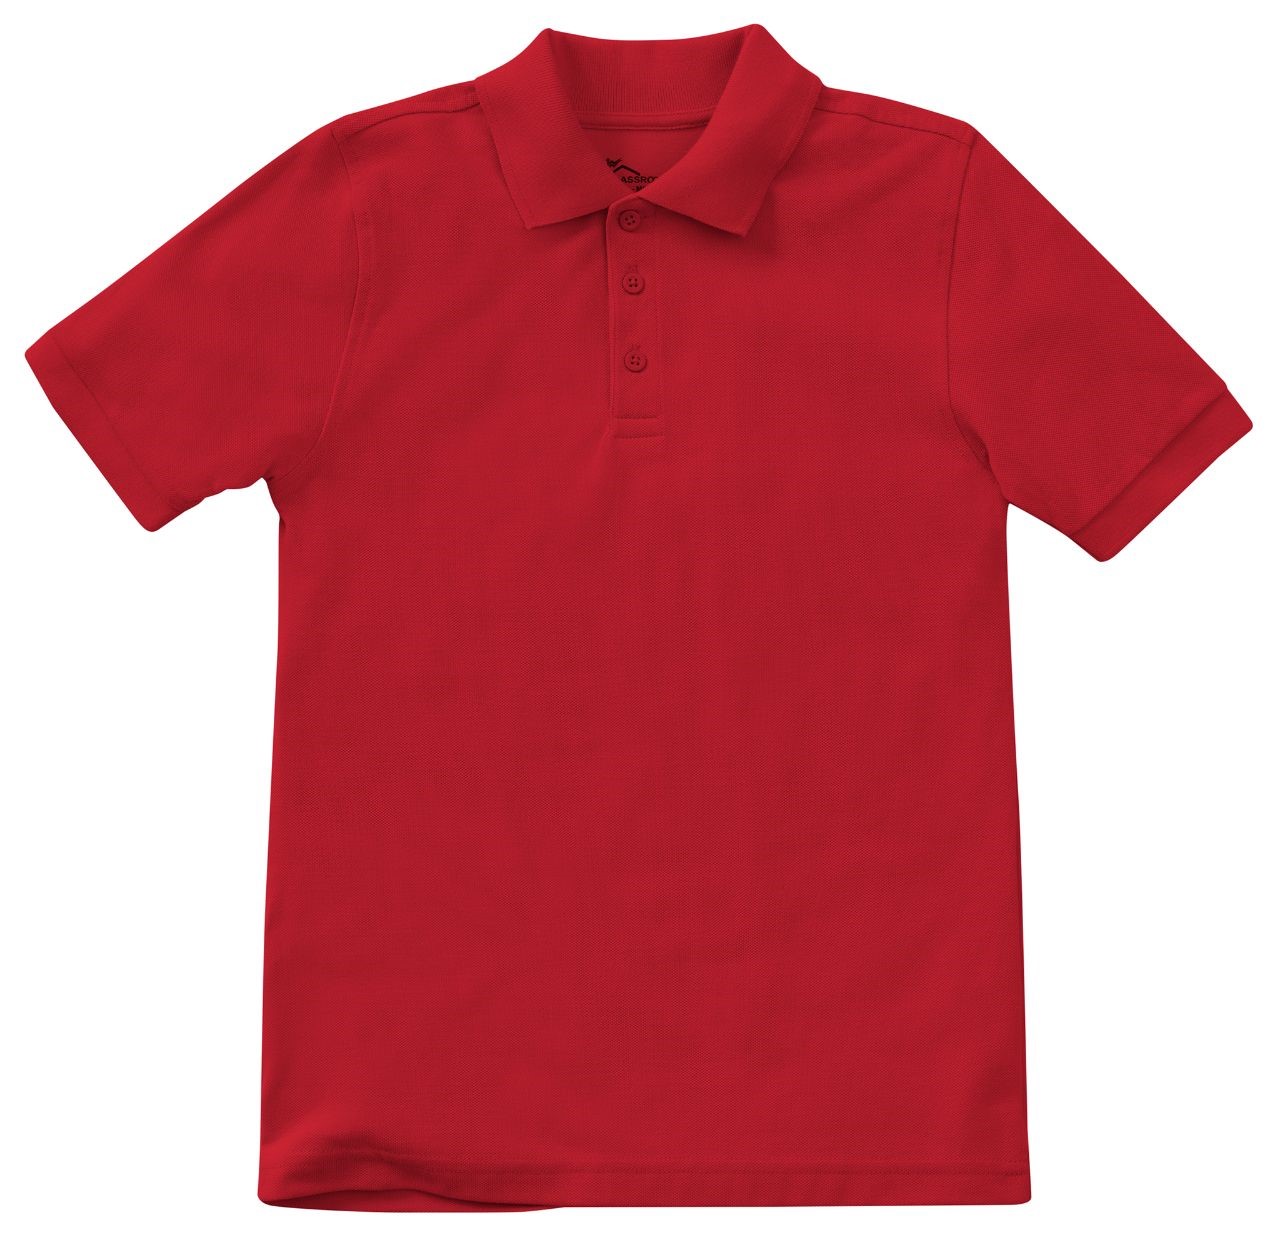 NF - Adult short sleeve Polo shirt with logo.